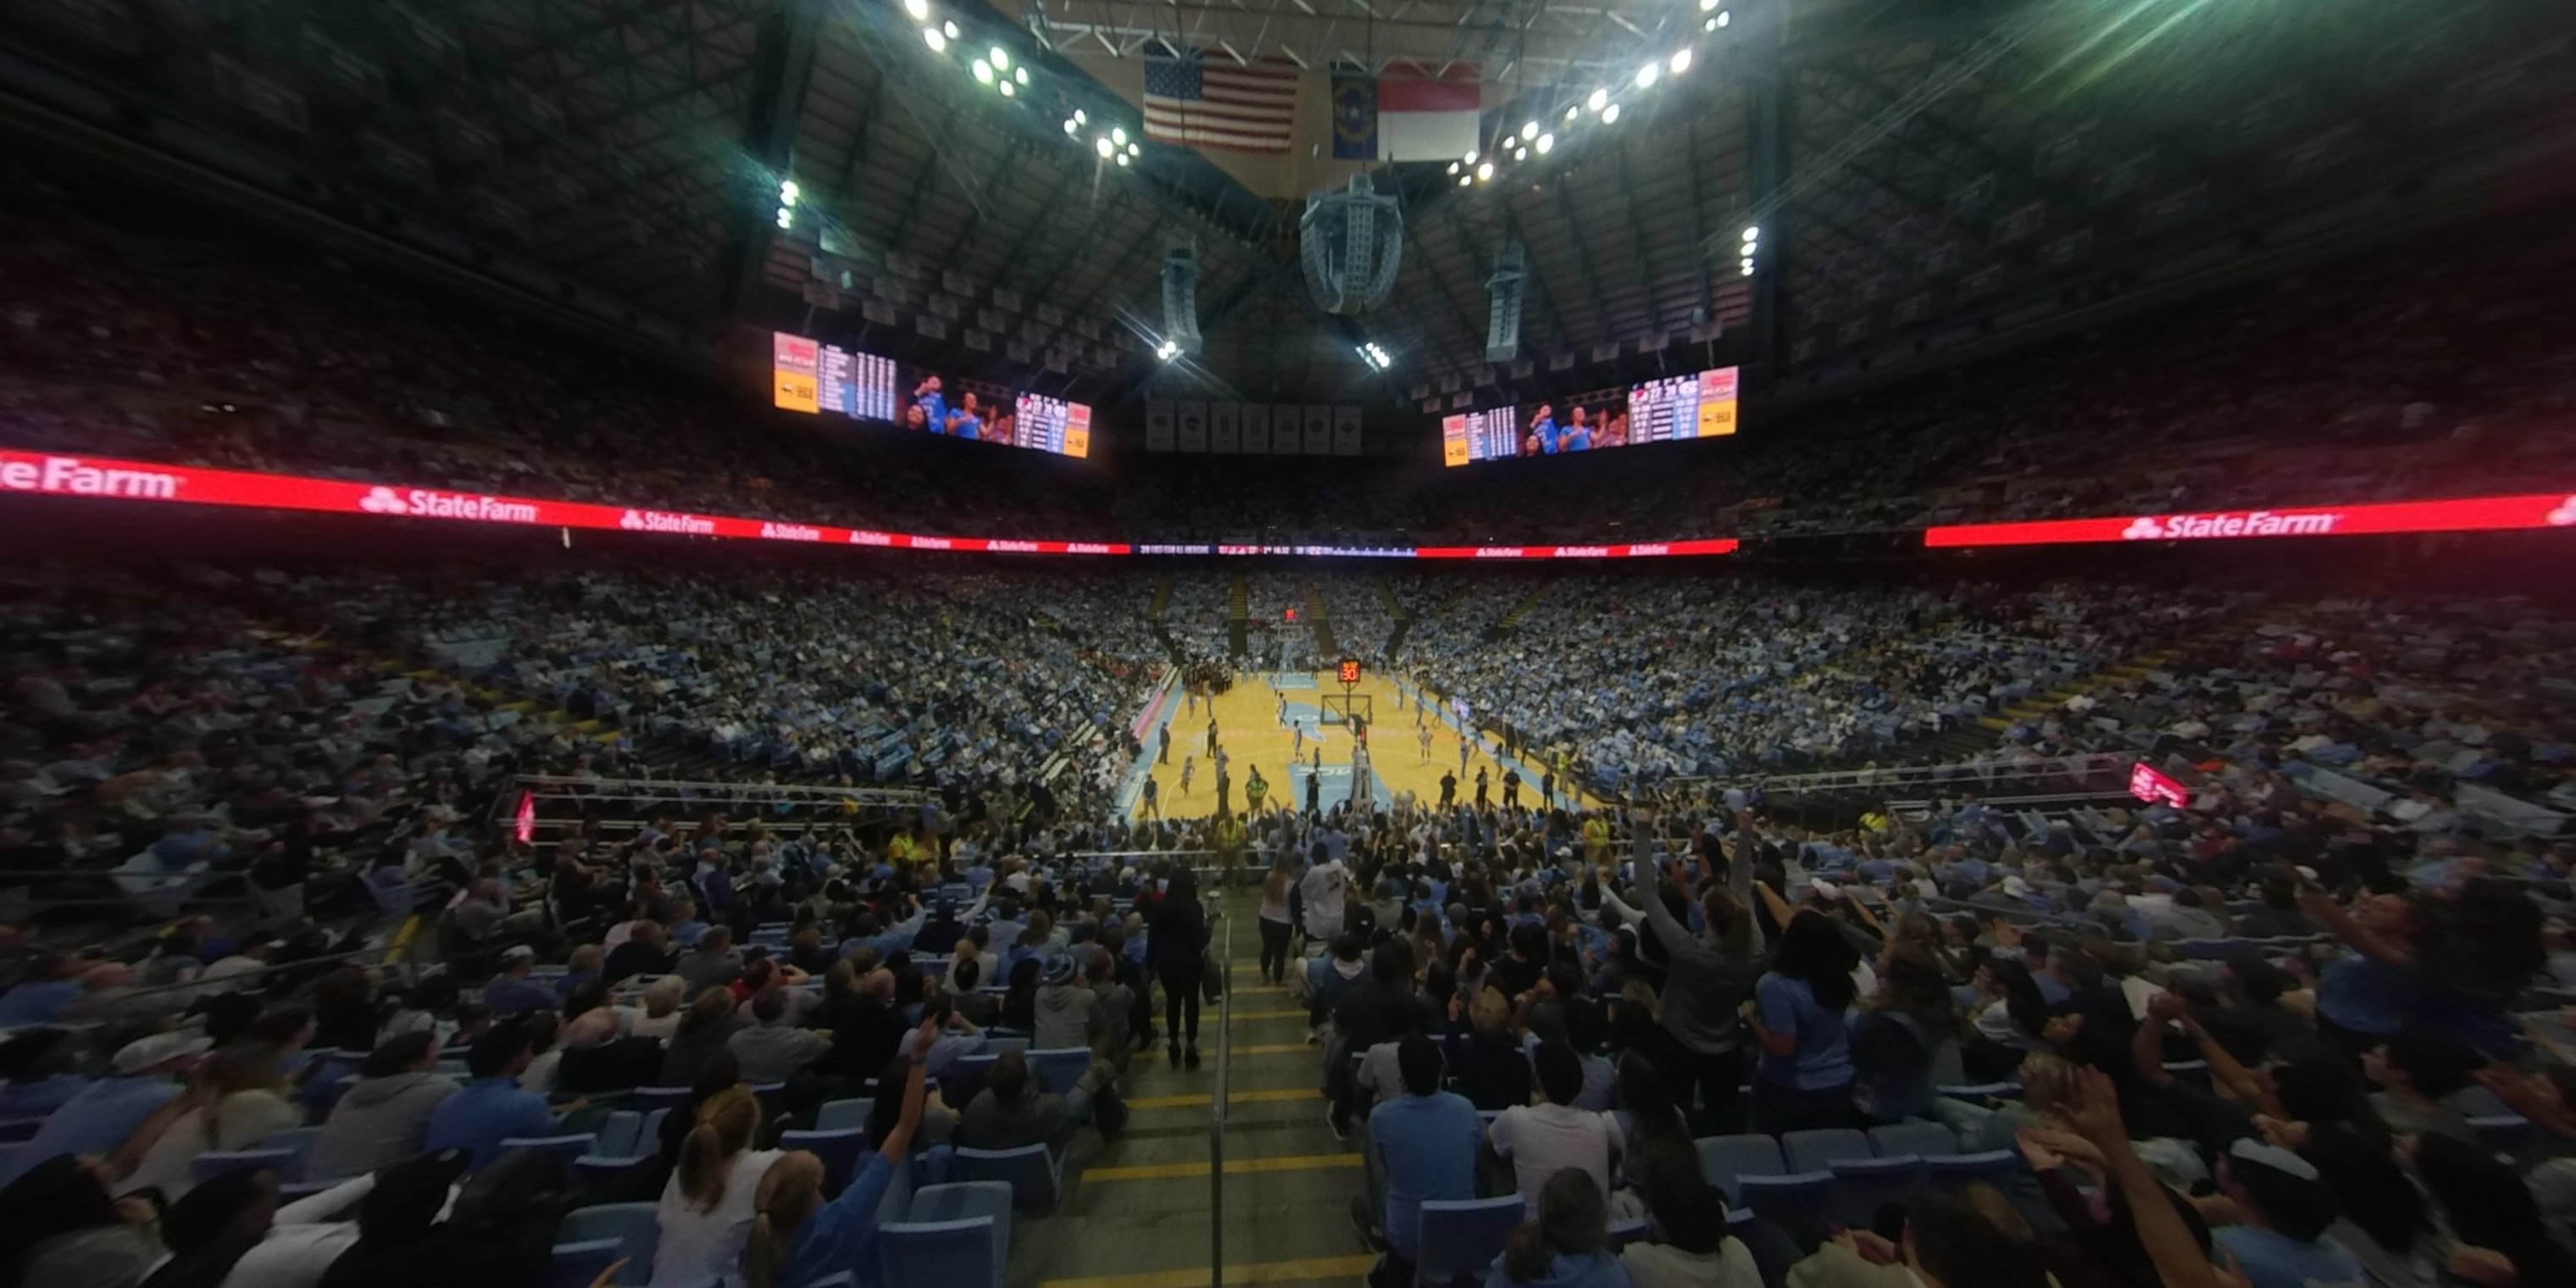 section 116 panoramic seat view  - dean smith center